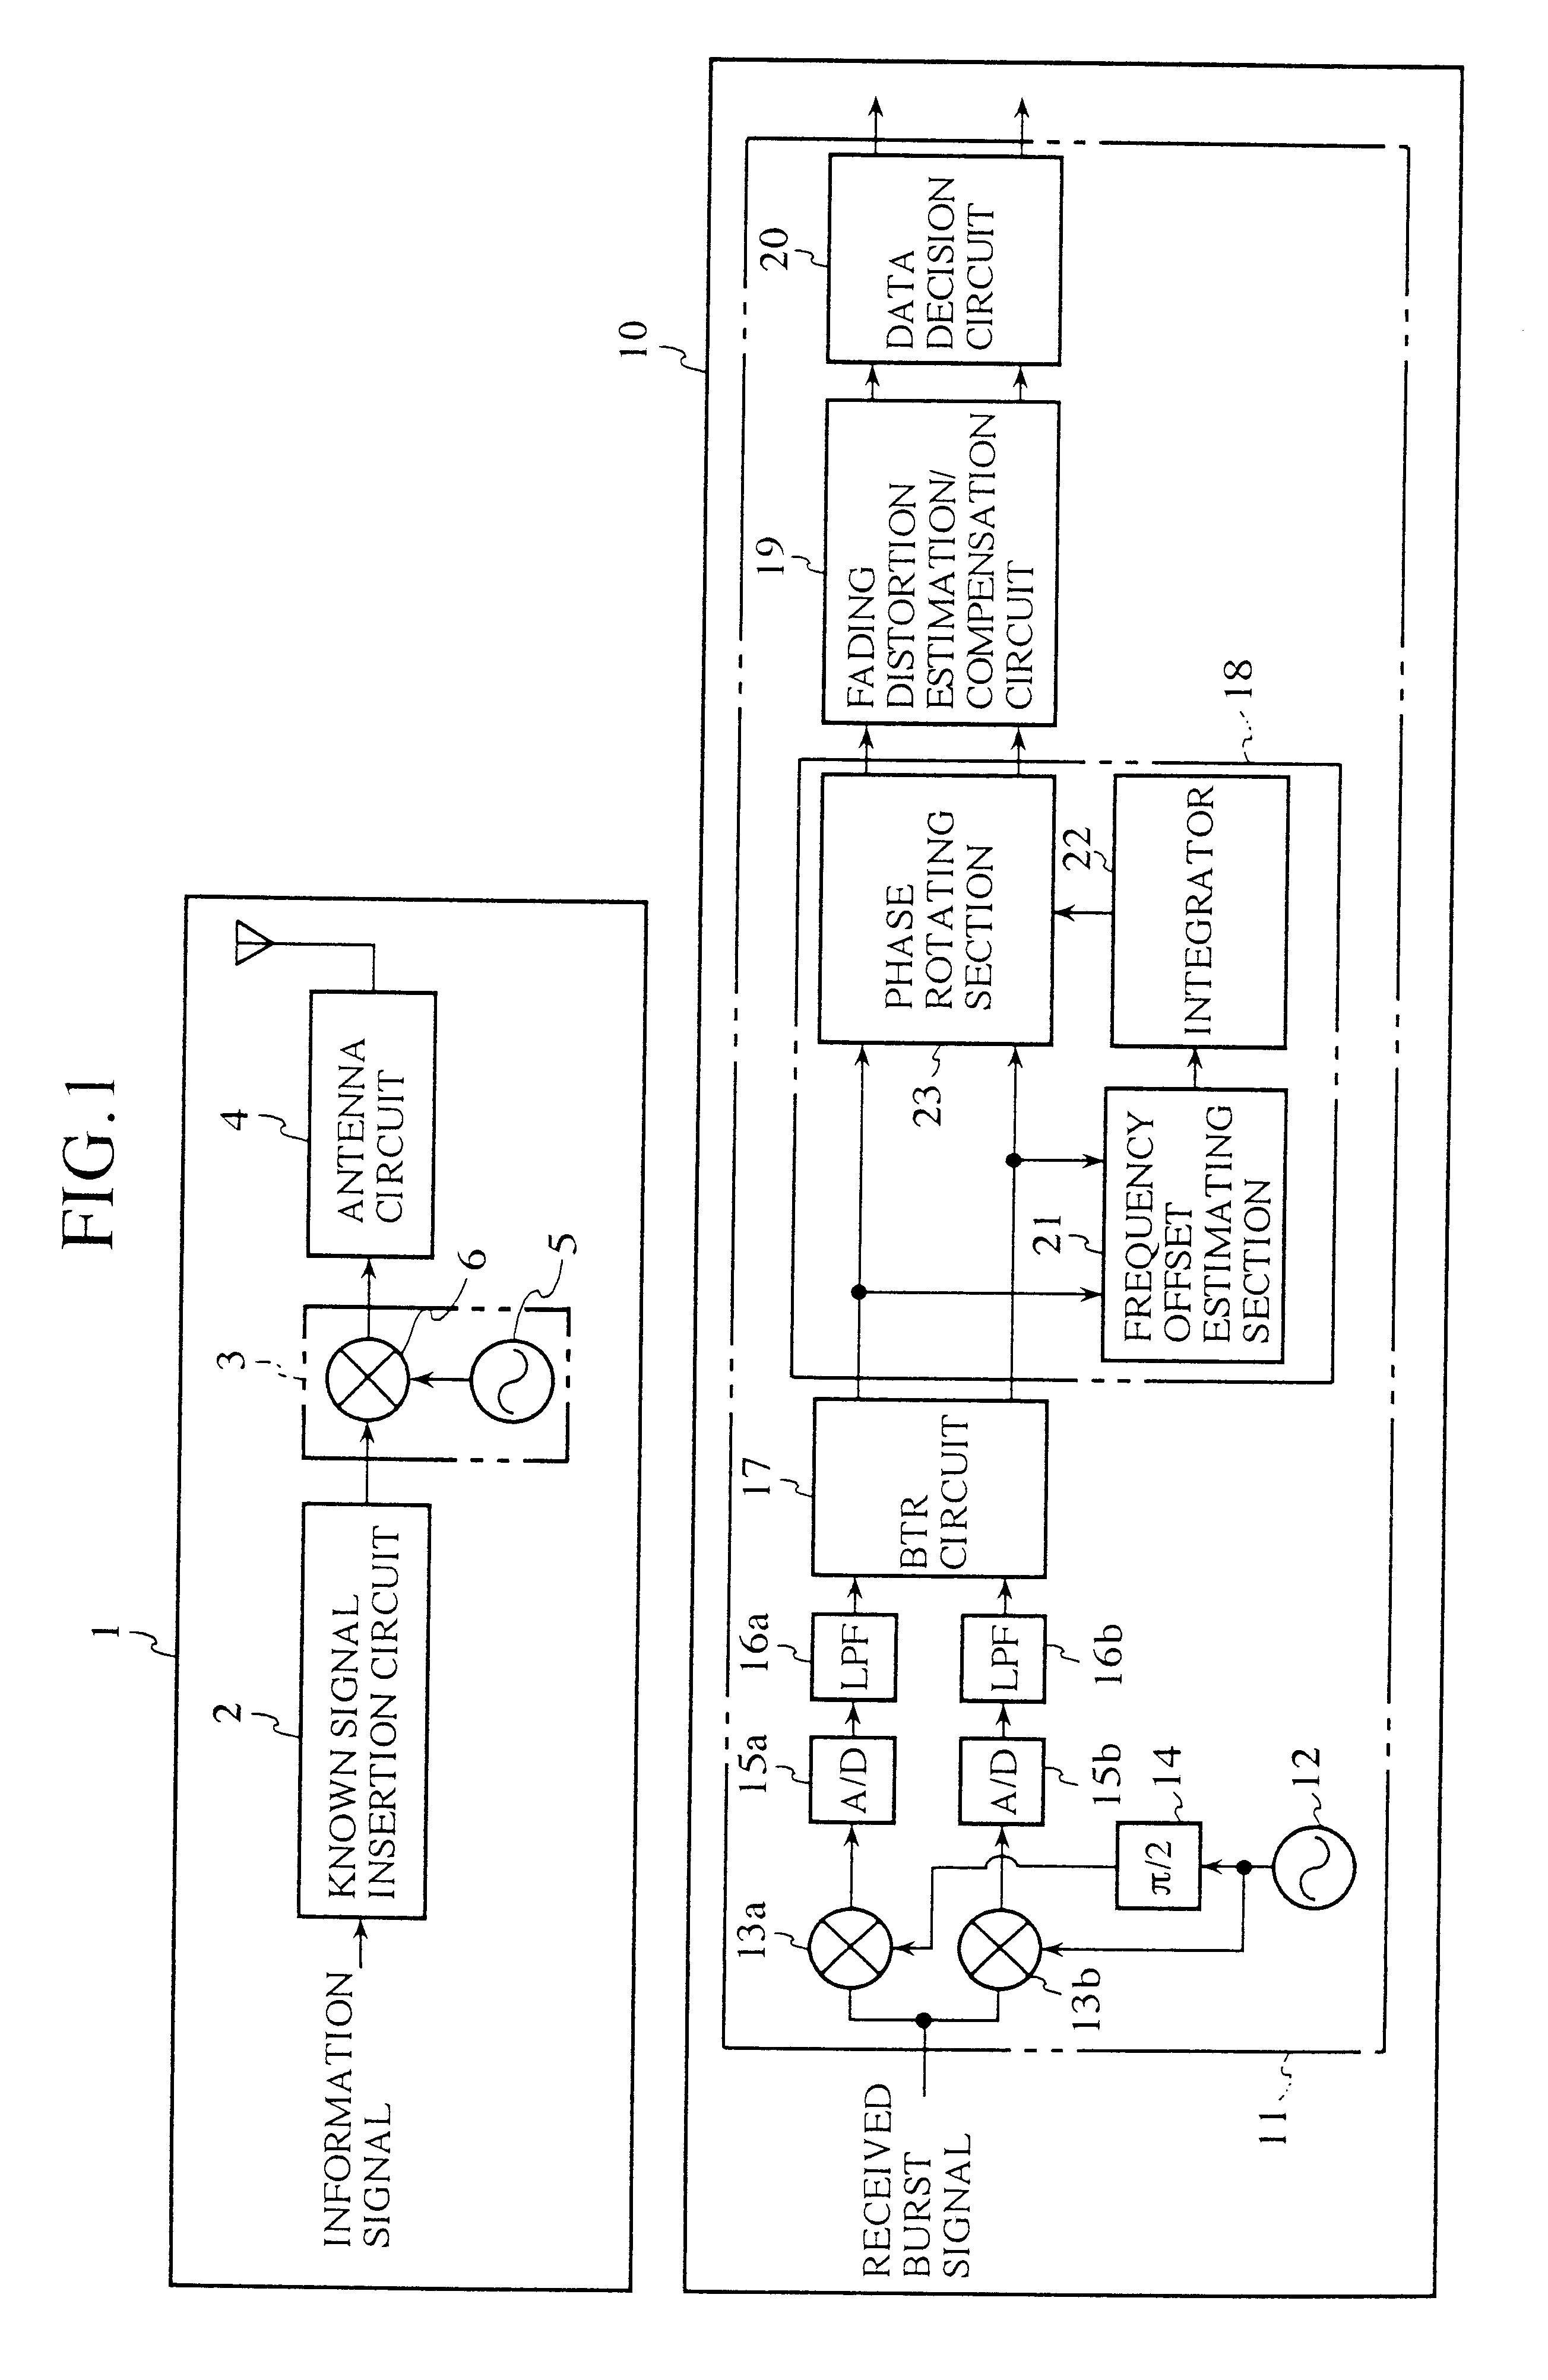 Automatic frequency controller and demodulator unit